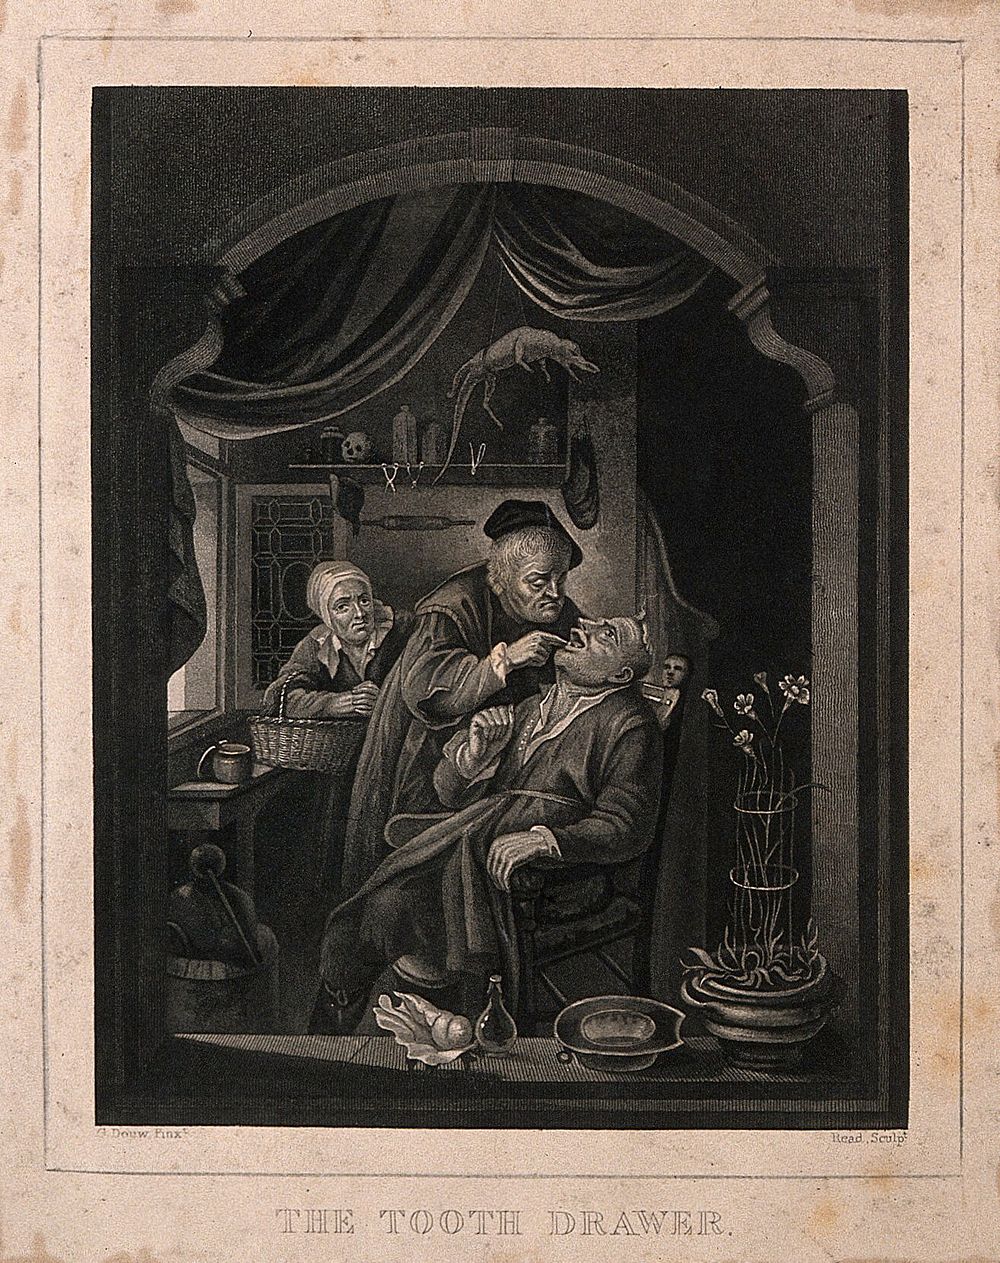 A surgeon extracting a tooth from a patient, while the latter's concerned wife stands in the background. Mezzotint by Read…